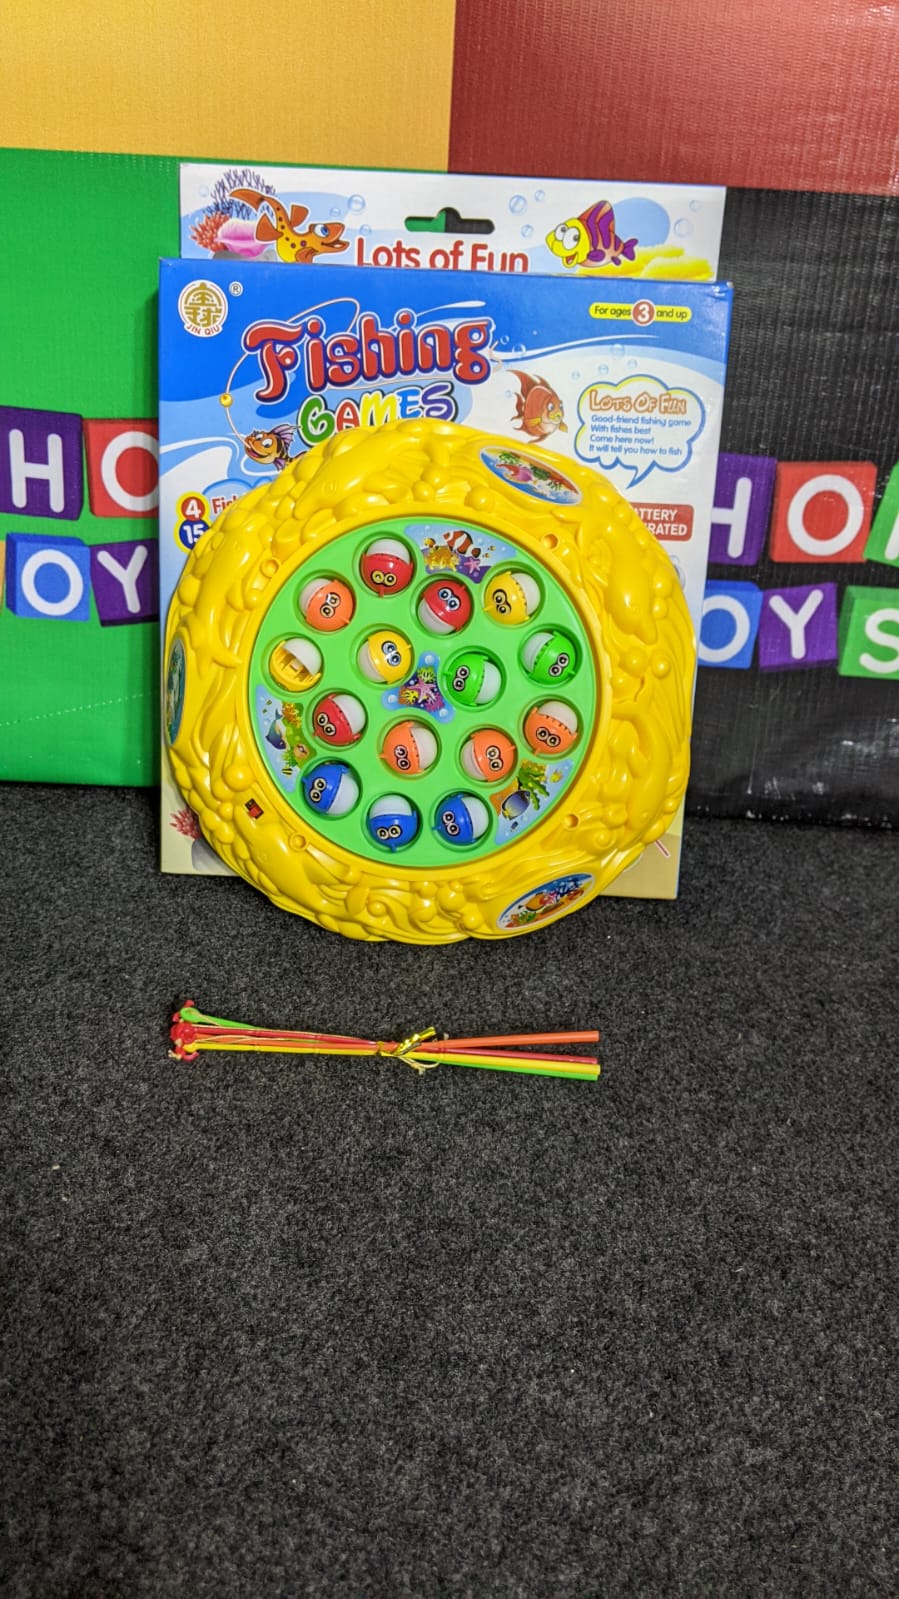 Fishing games toy for children